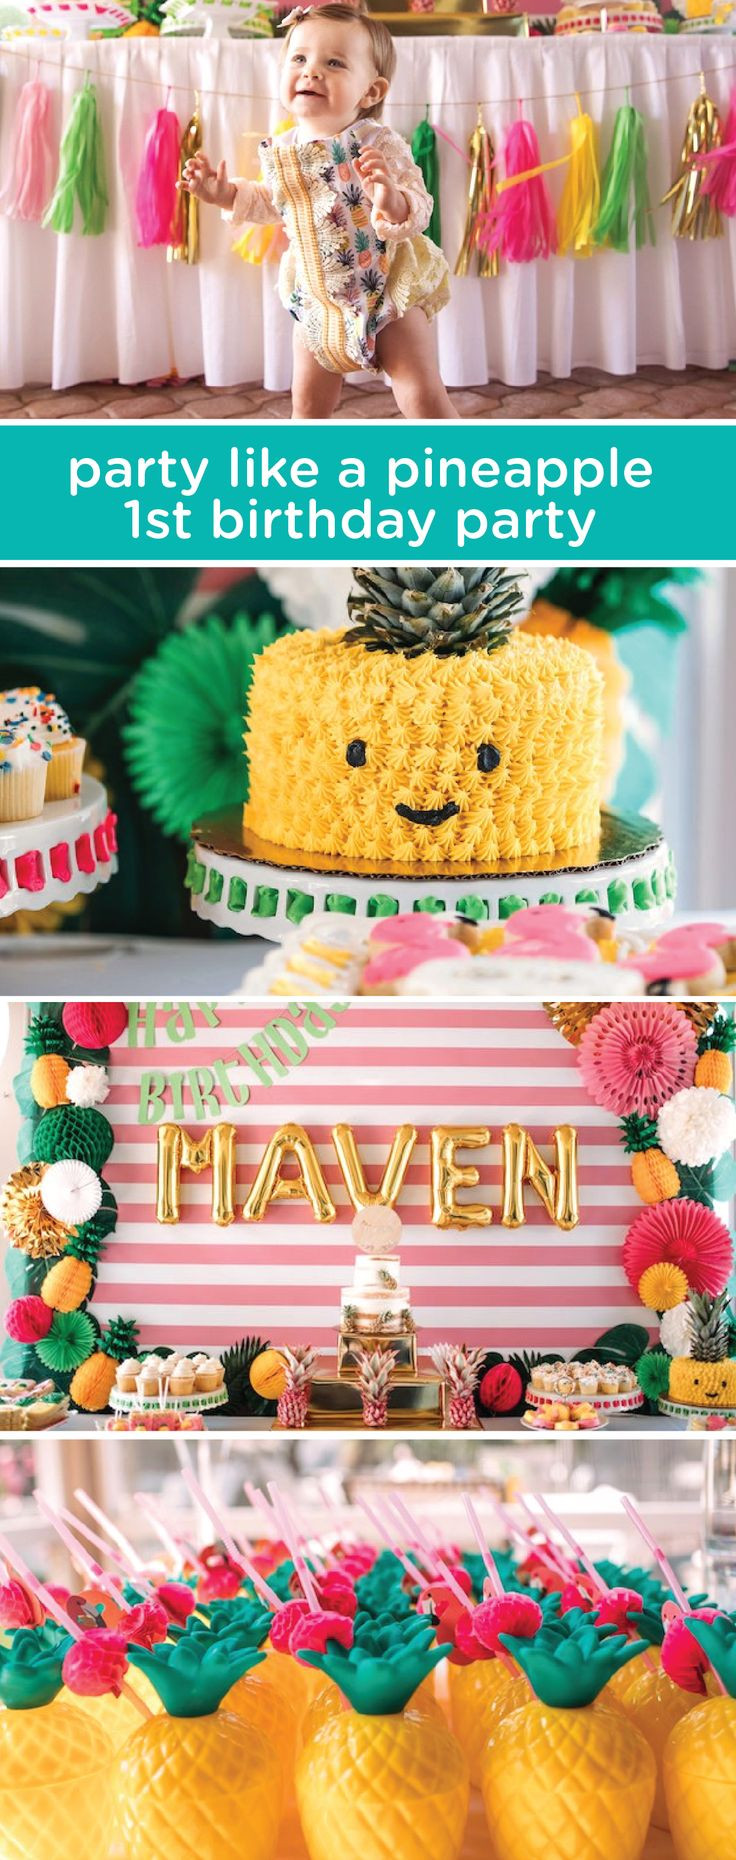 Girl Summer Birthday Party Ideas
 "Party Like a Pineapple" Tropical Birthday Party